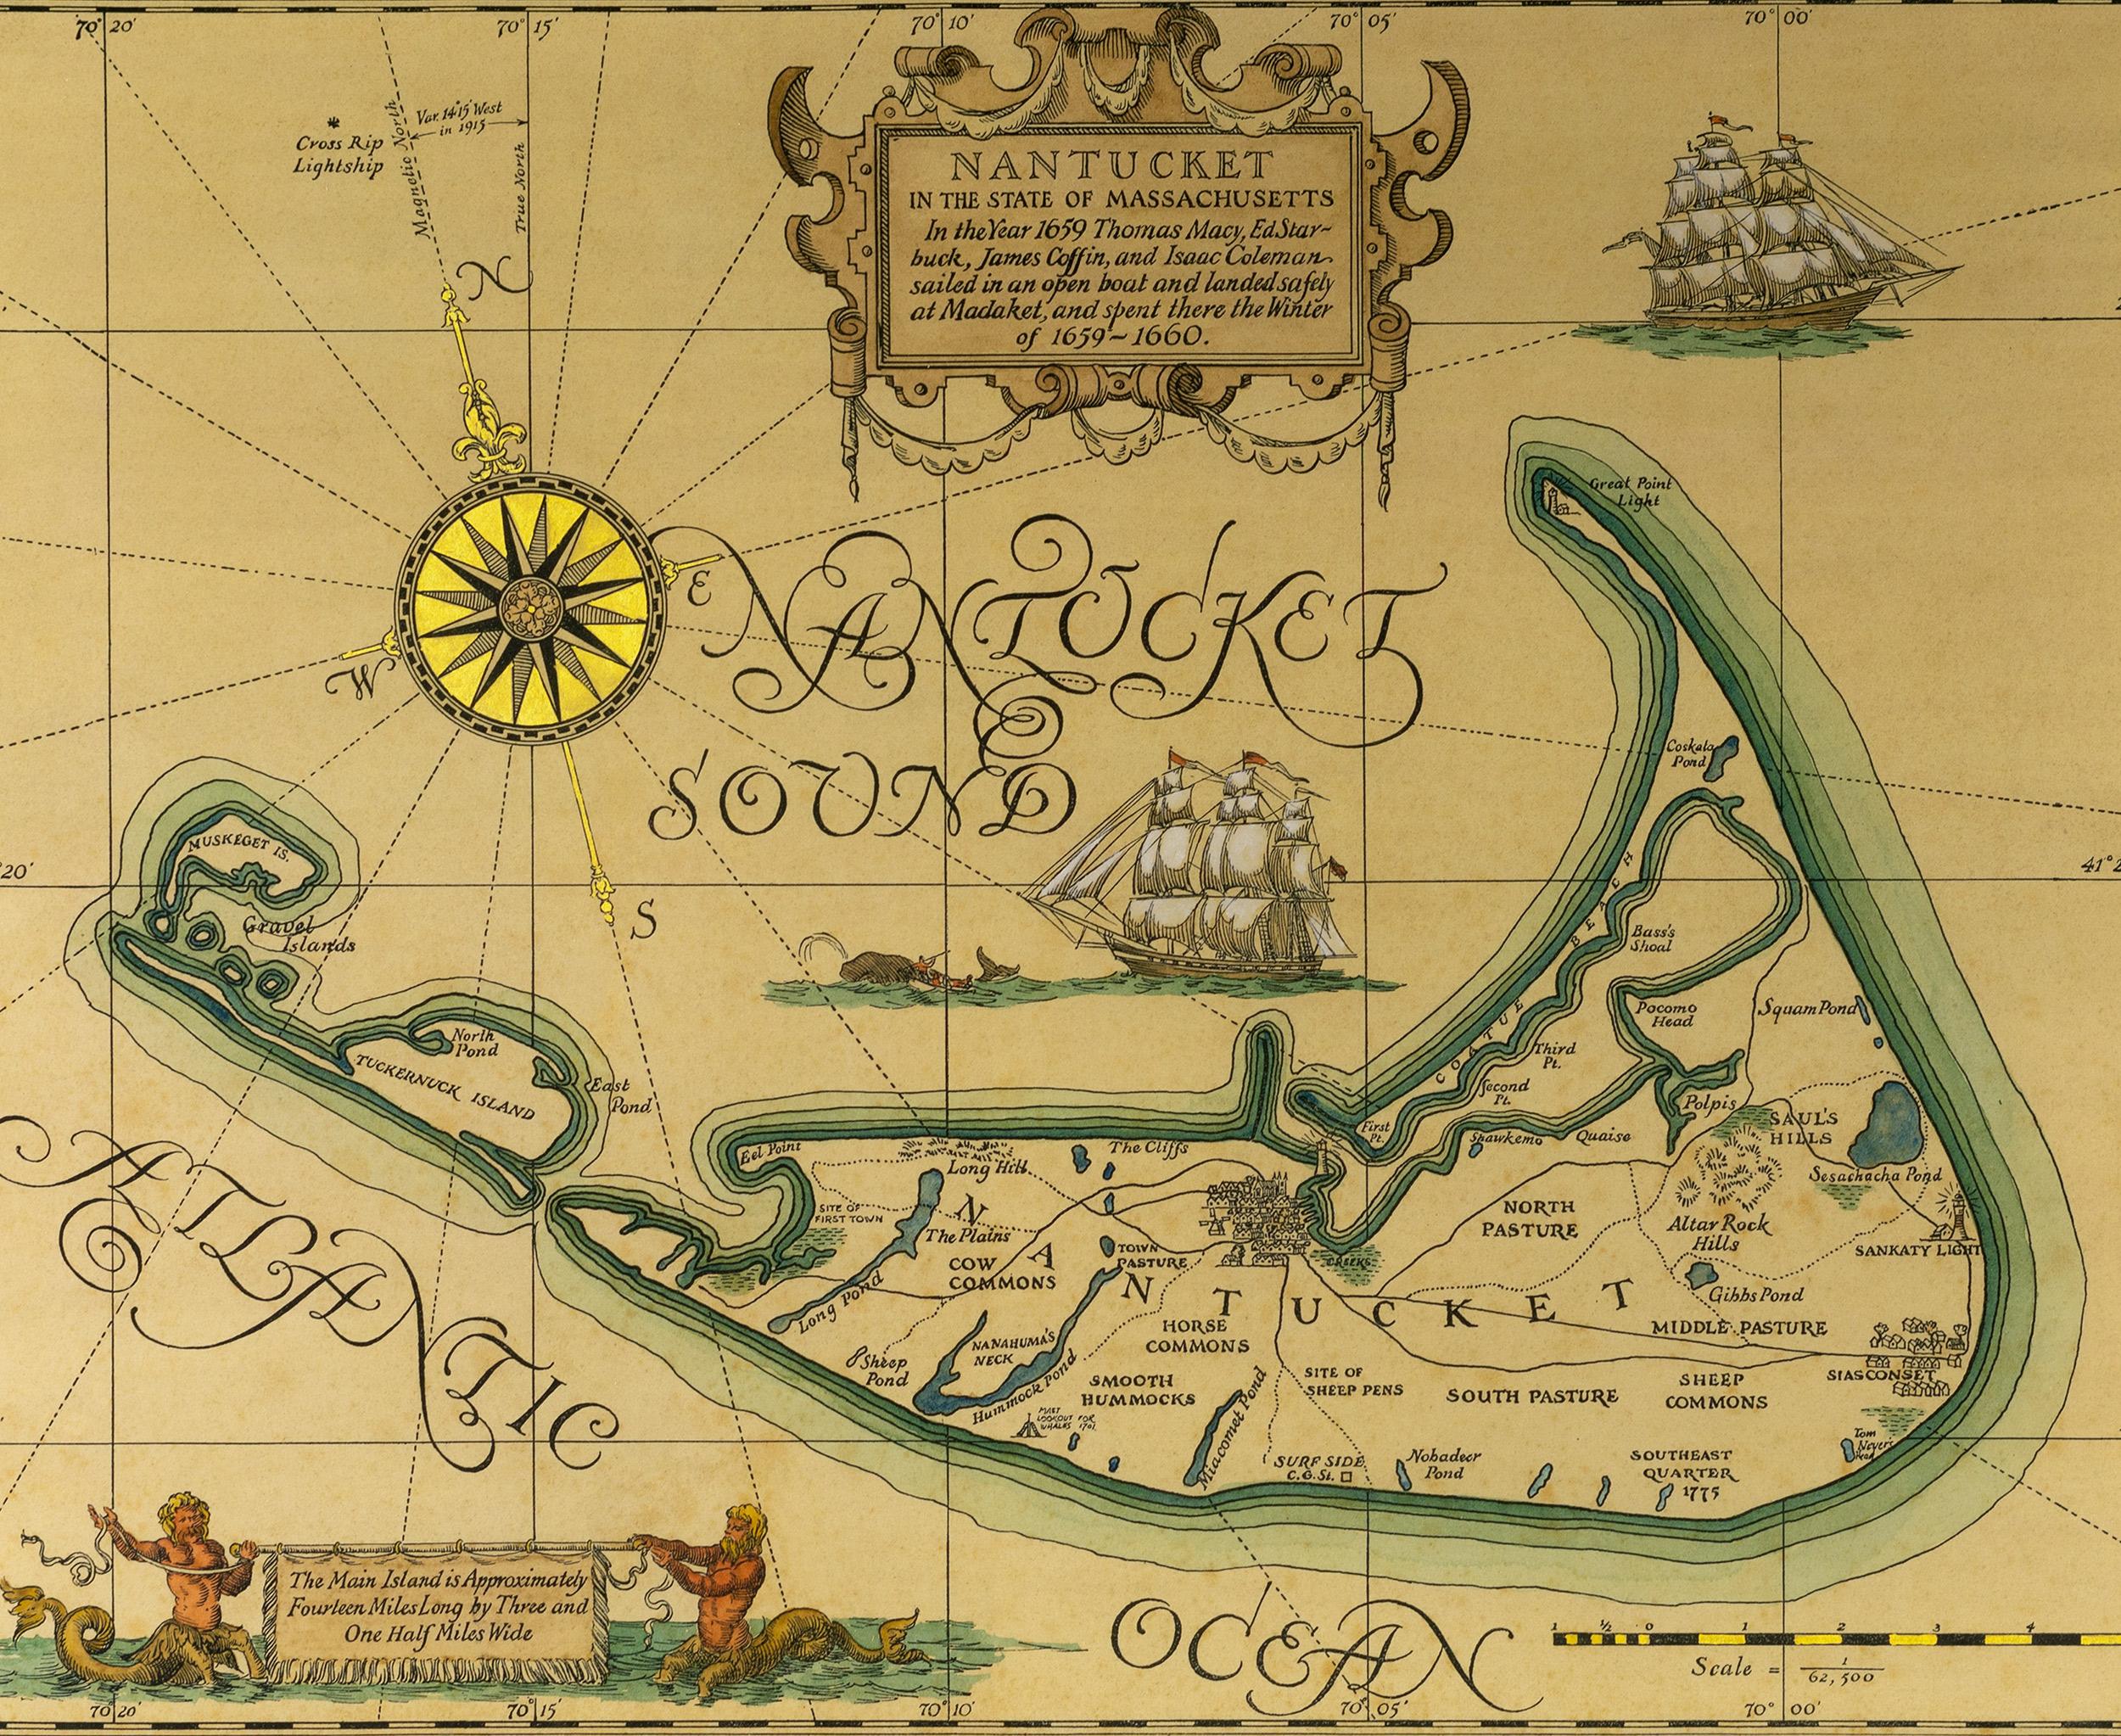 Hand colored map of Nantucket Island, decorated with small illustrations of clipper ships, a spouting whale, a compass rose and simple cartography, showing villages, ponds, major roads and beaches. In the style of Austin Strong.
 